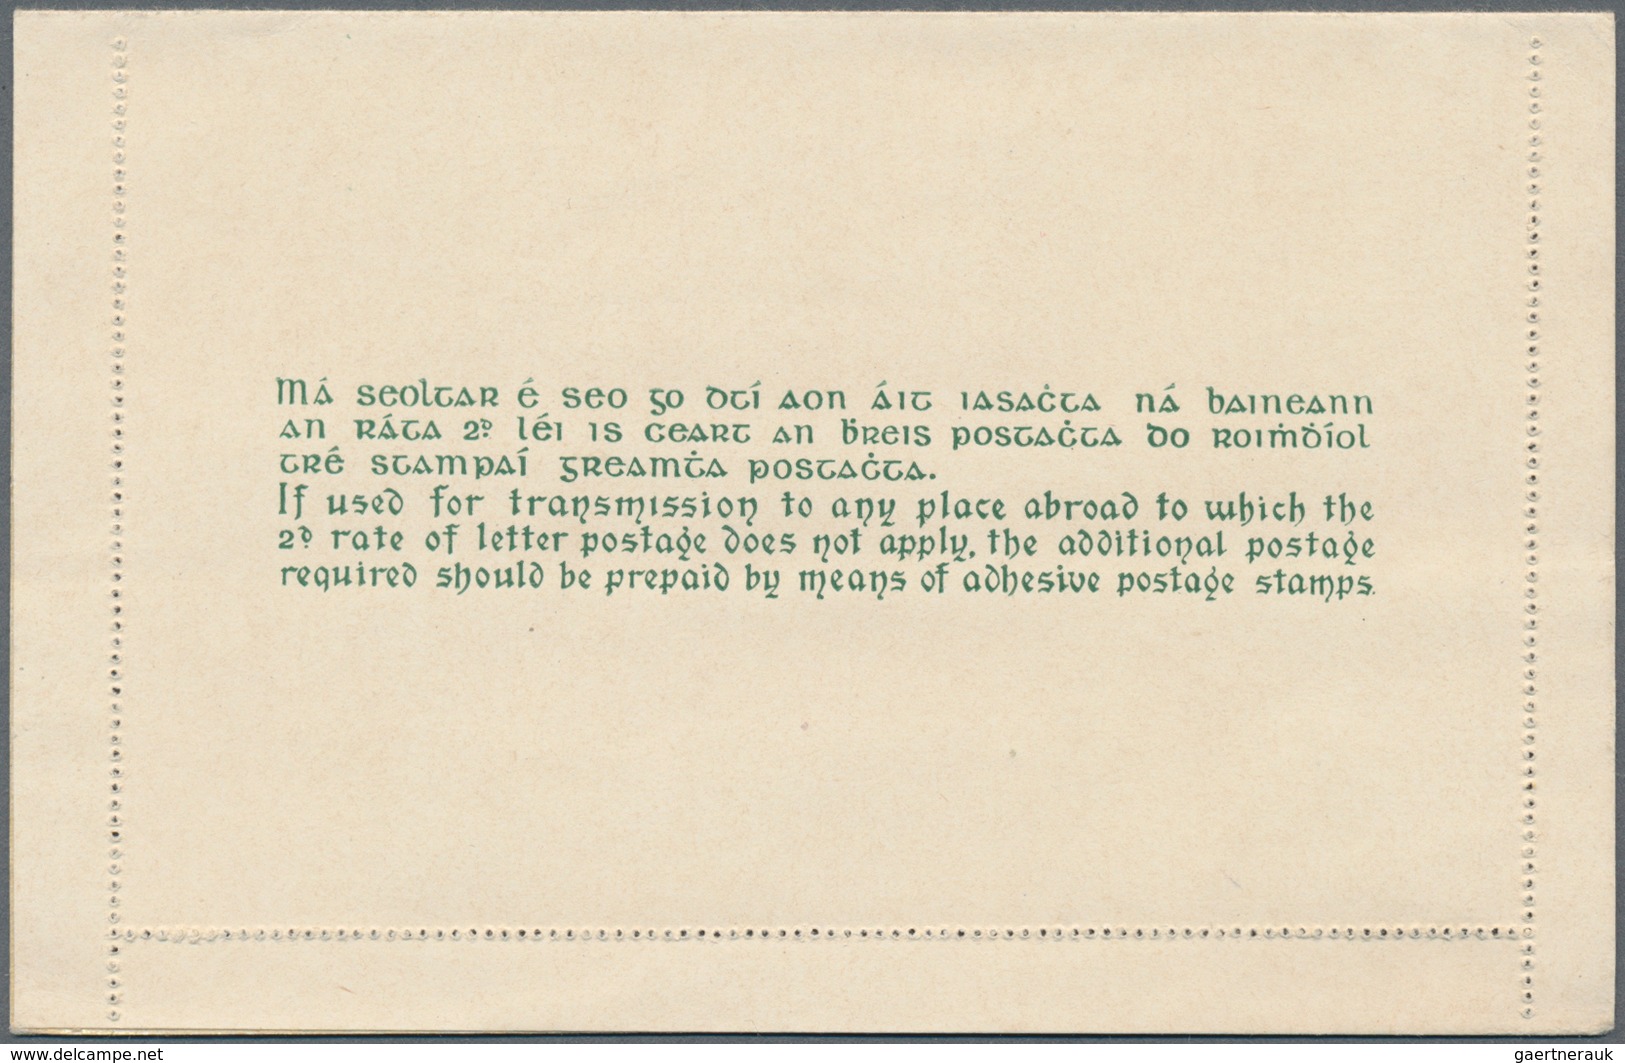 Irland - Ganzsachen: 1924, 2 Pg. Letter Card Unused With Wrapper For 10 Letter Cards 2/-. Very Scarc - Ganzsachen